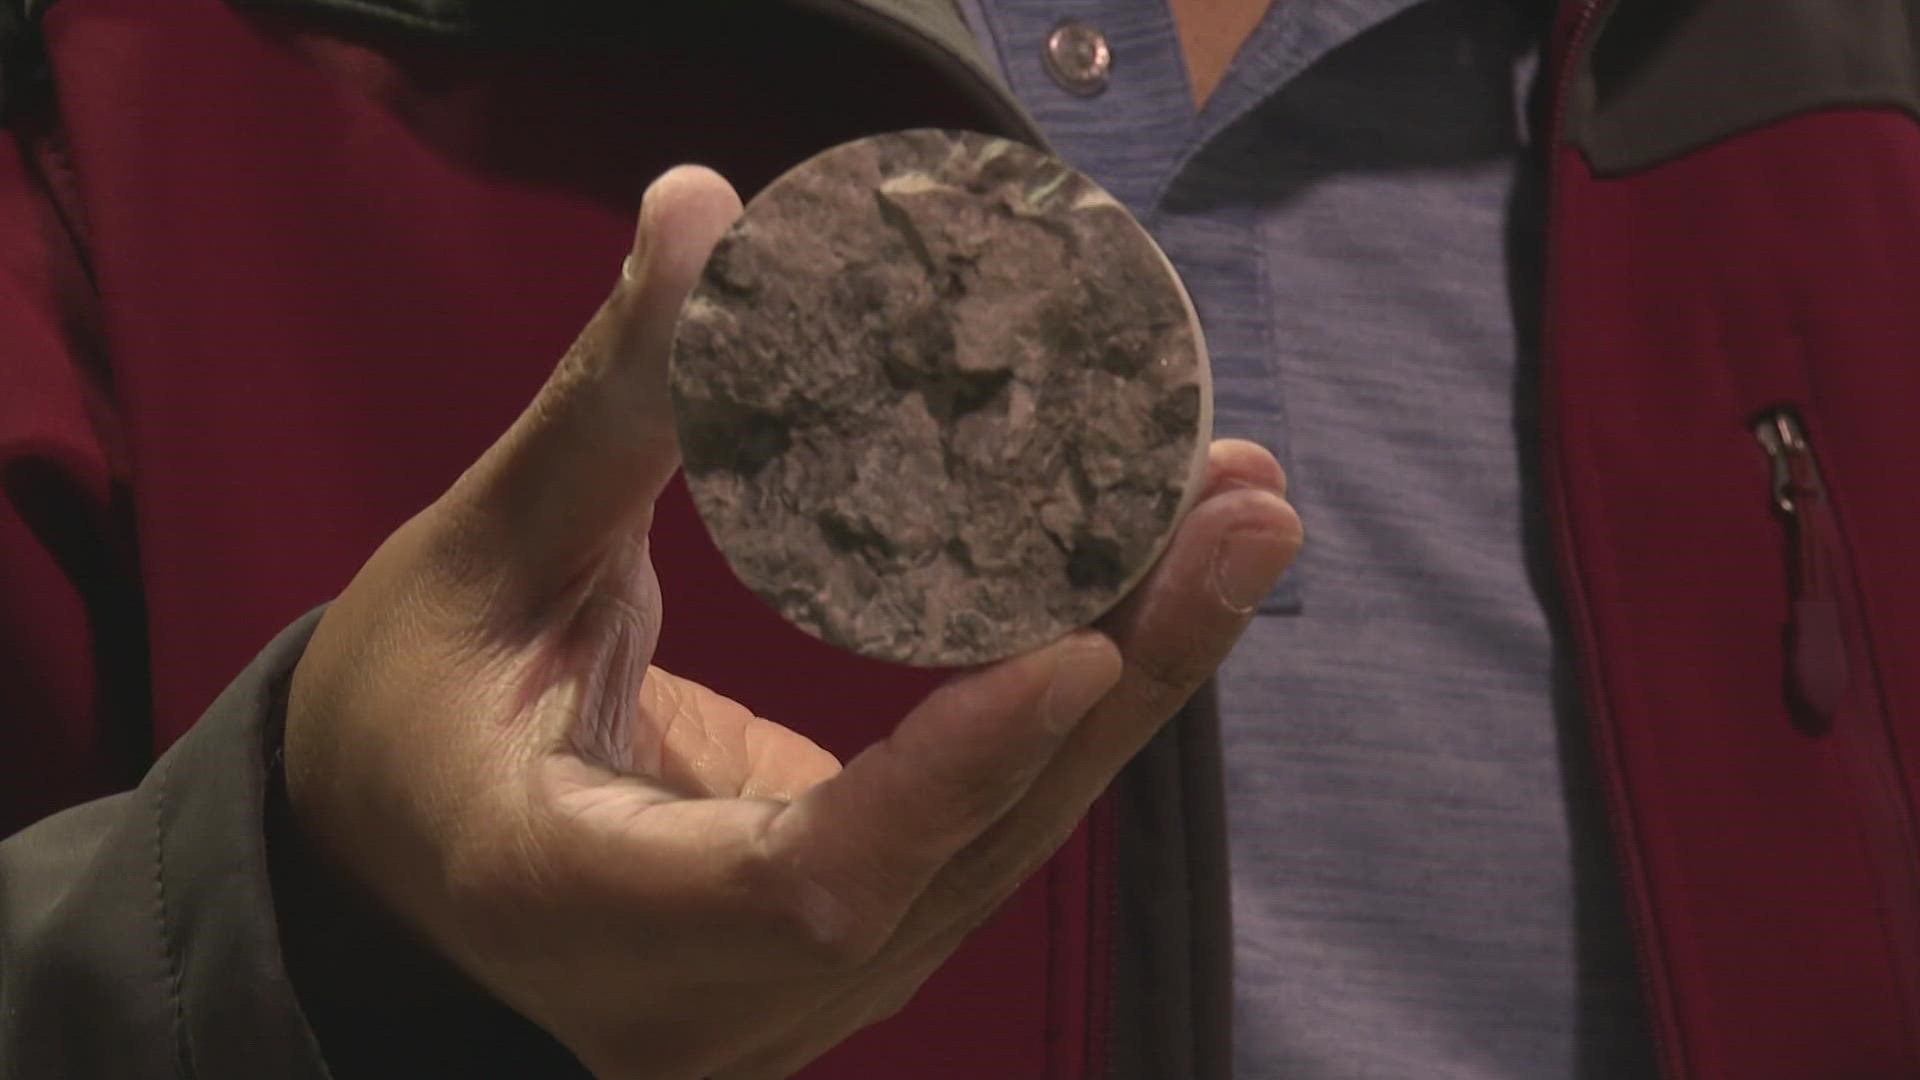 The rock core samples were collected 18 stories underground, and then donated to the Kentucky Geological Survey.